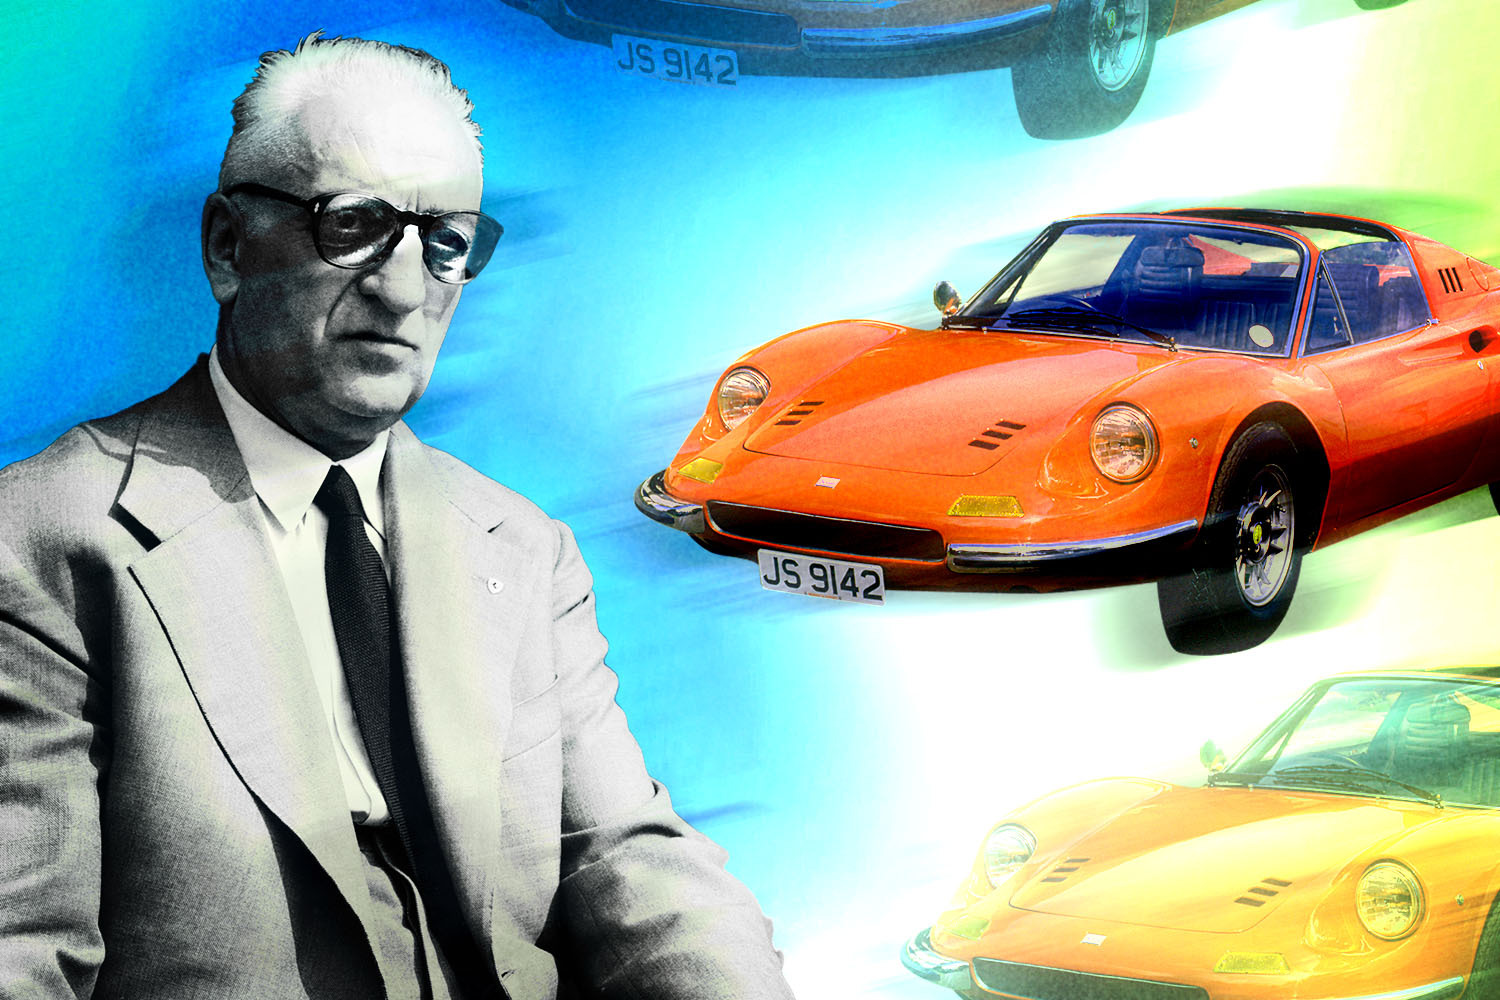 Enzo Ferrari in black and white pictured here in 1959. He's shown next to a 1973 Ferrari Dino 246 GTS road car, which was inspired by his son Alfredo, or Alfredino, Ferrari.